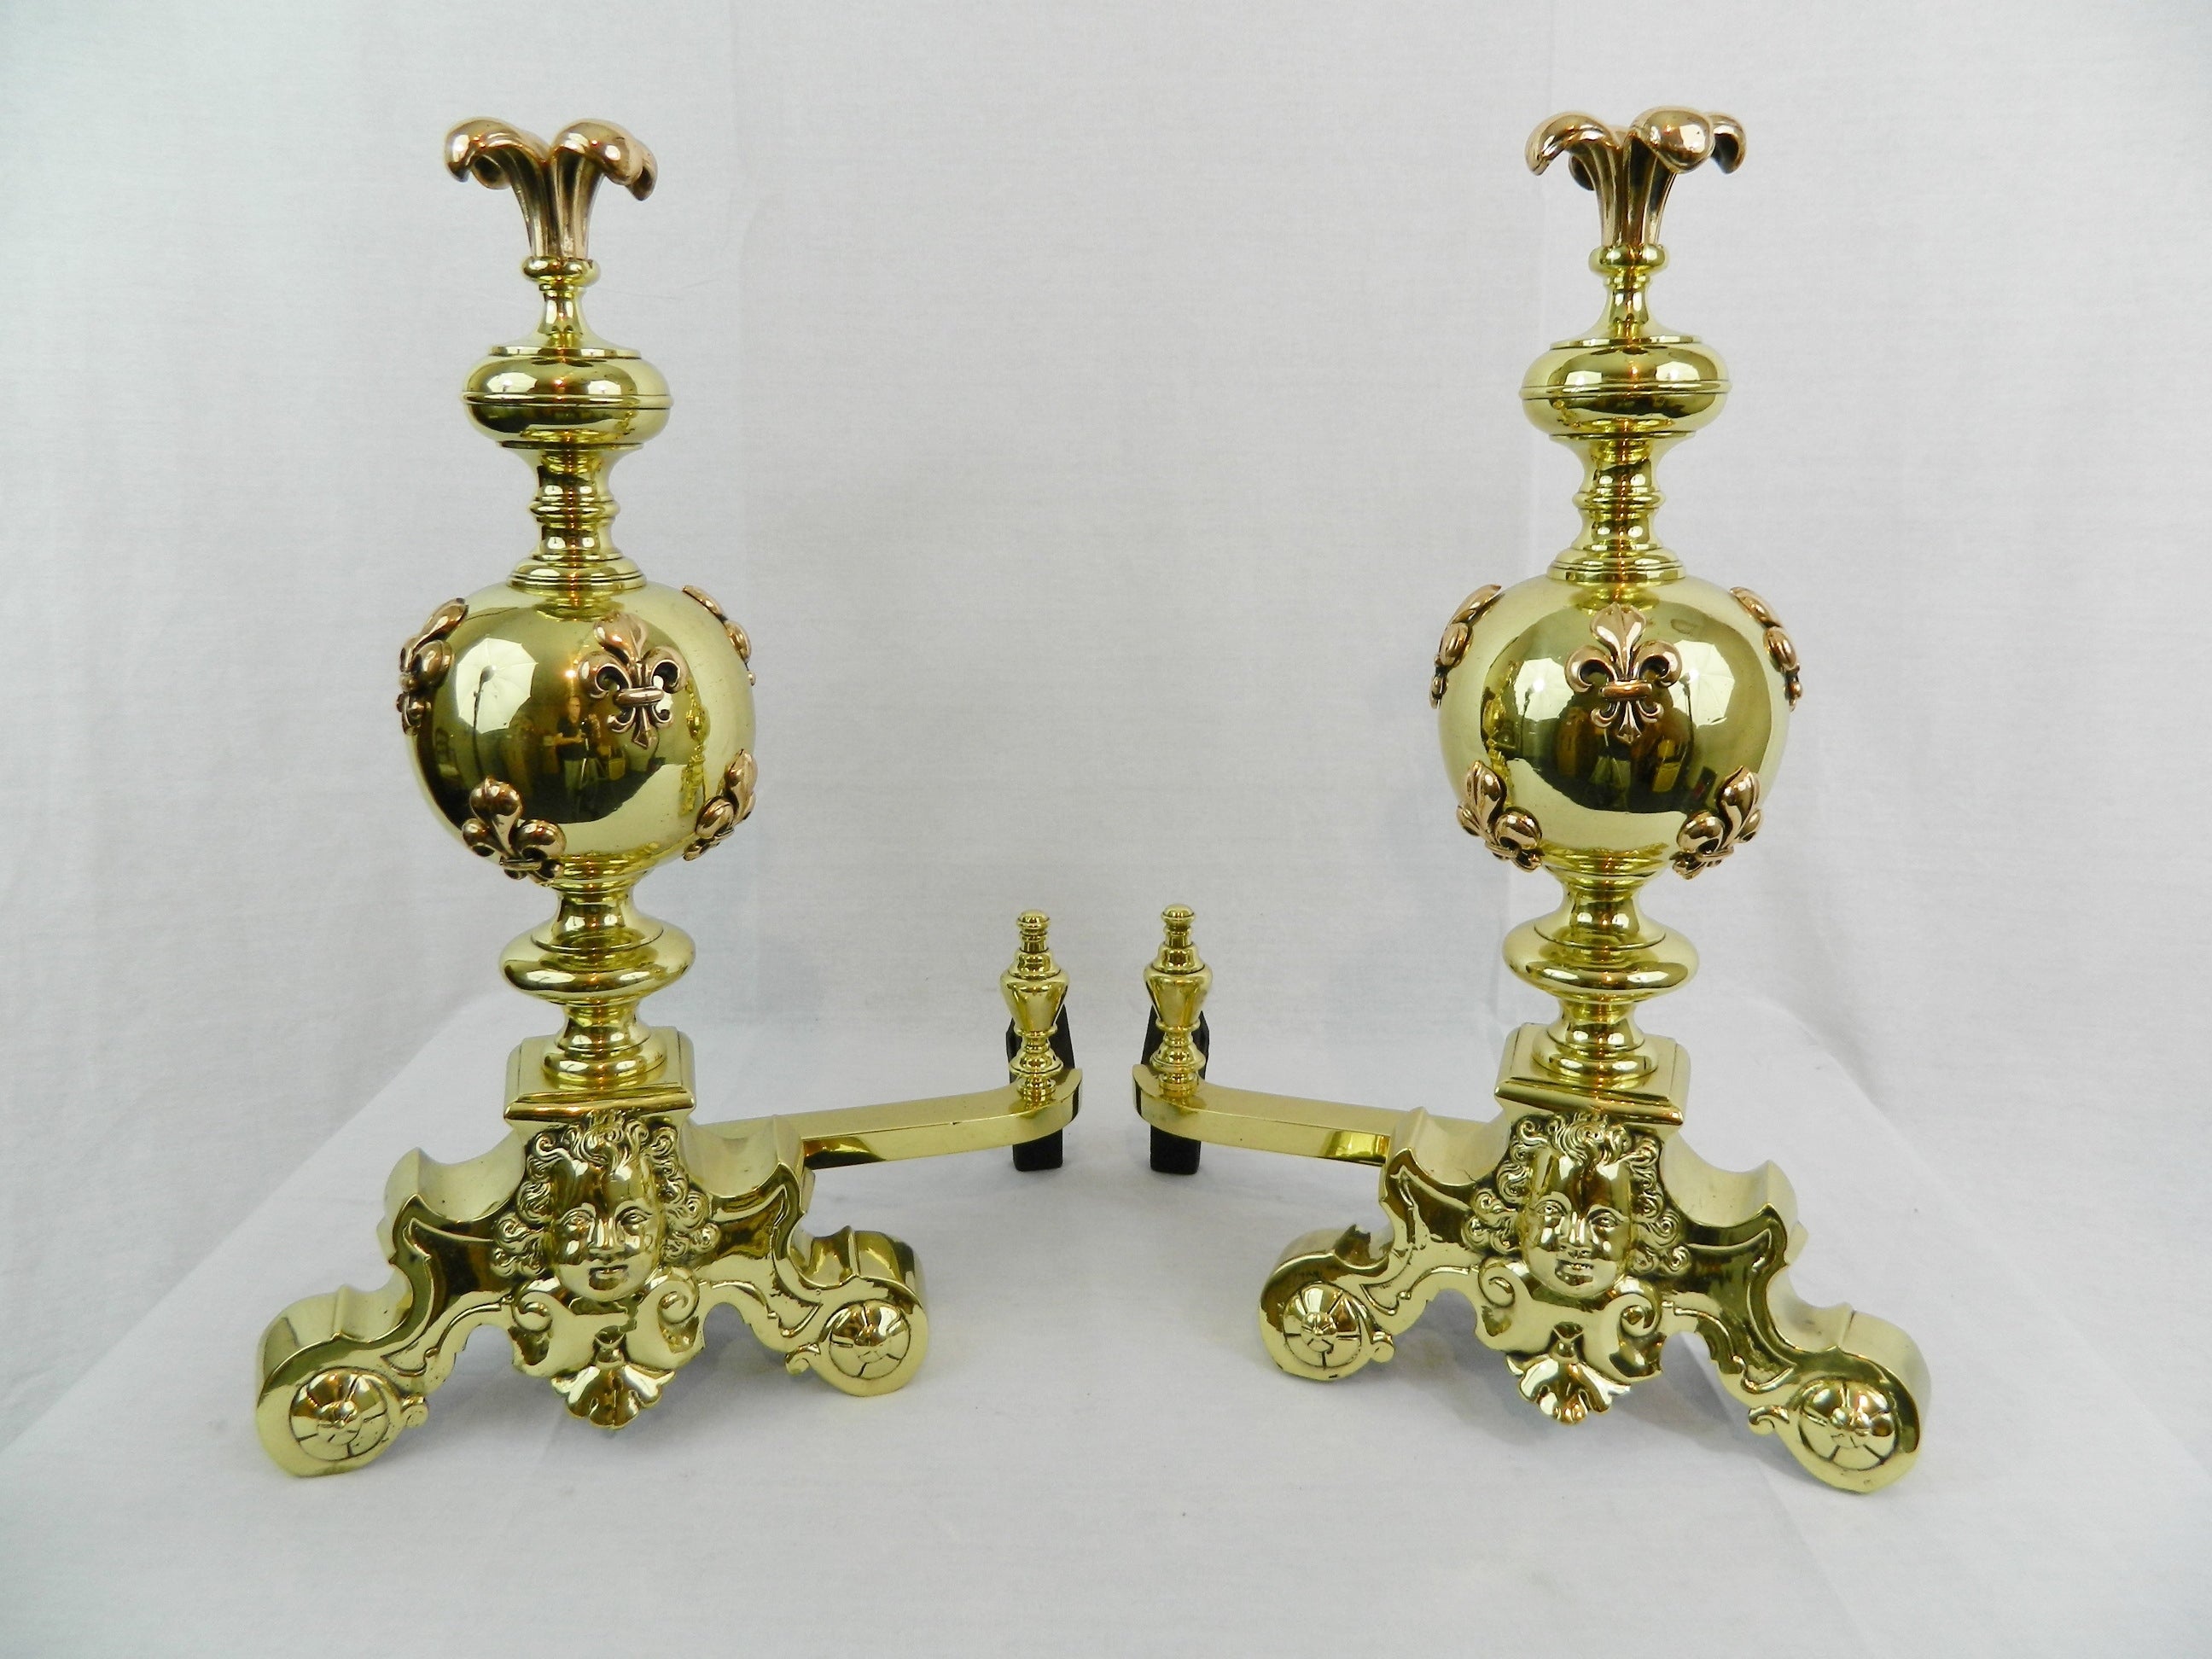 Pair of Chenets or Andirons with a Fleur-de-Lys Motif Finials, 19th Century